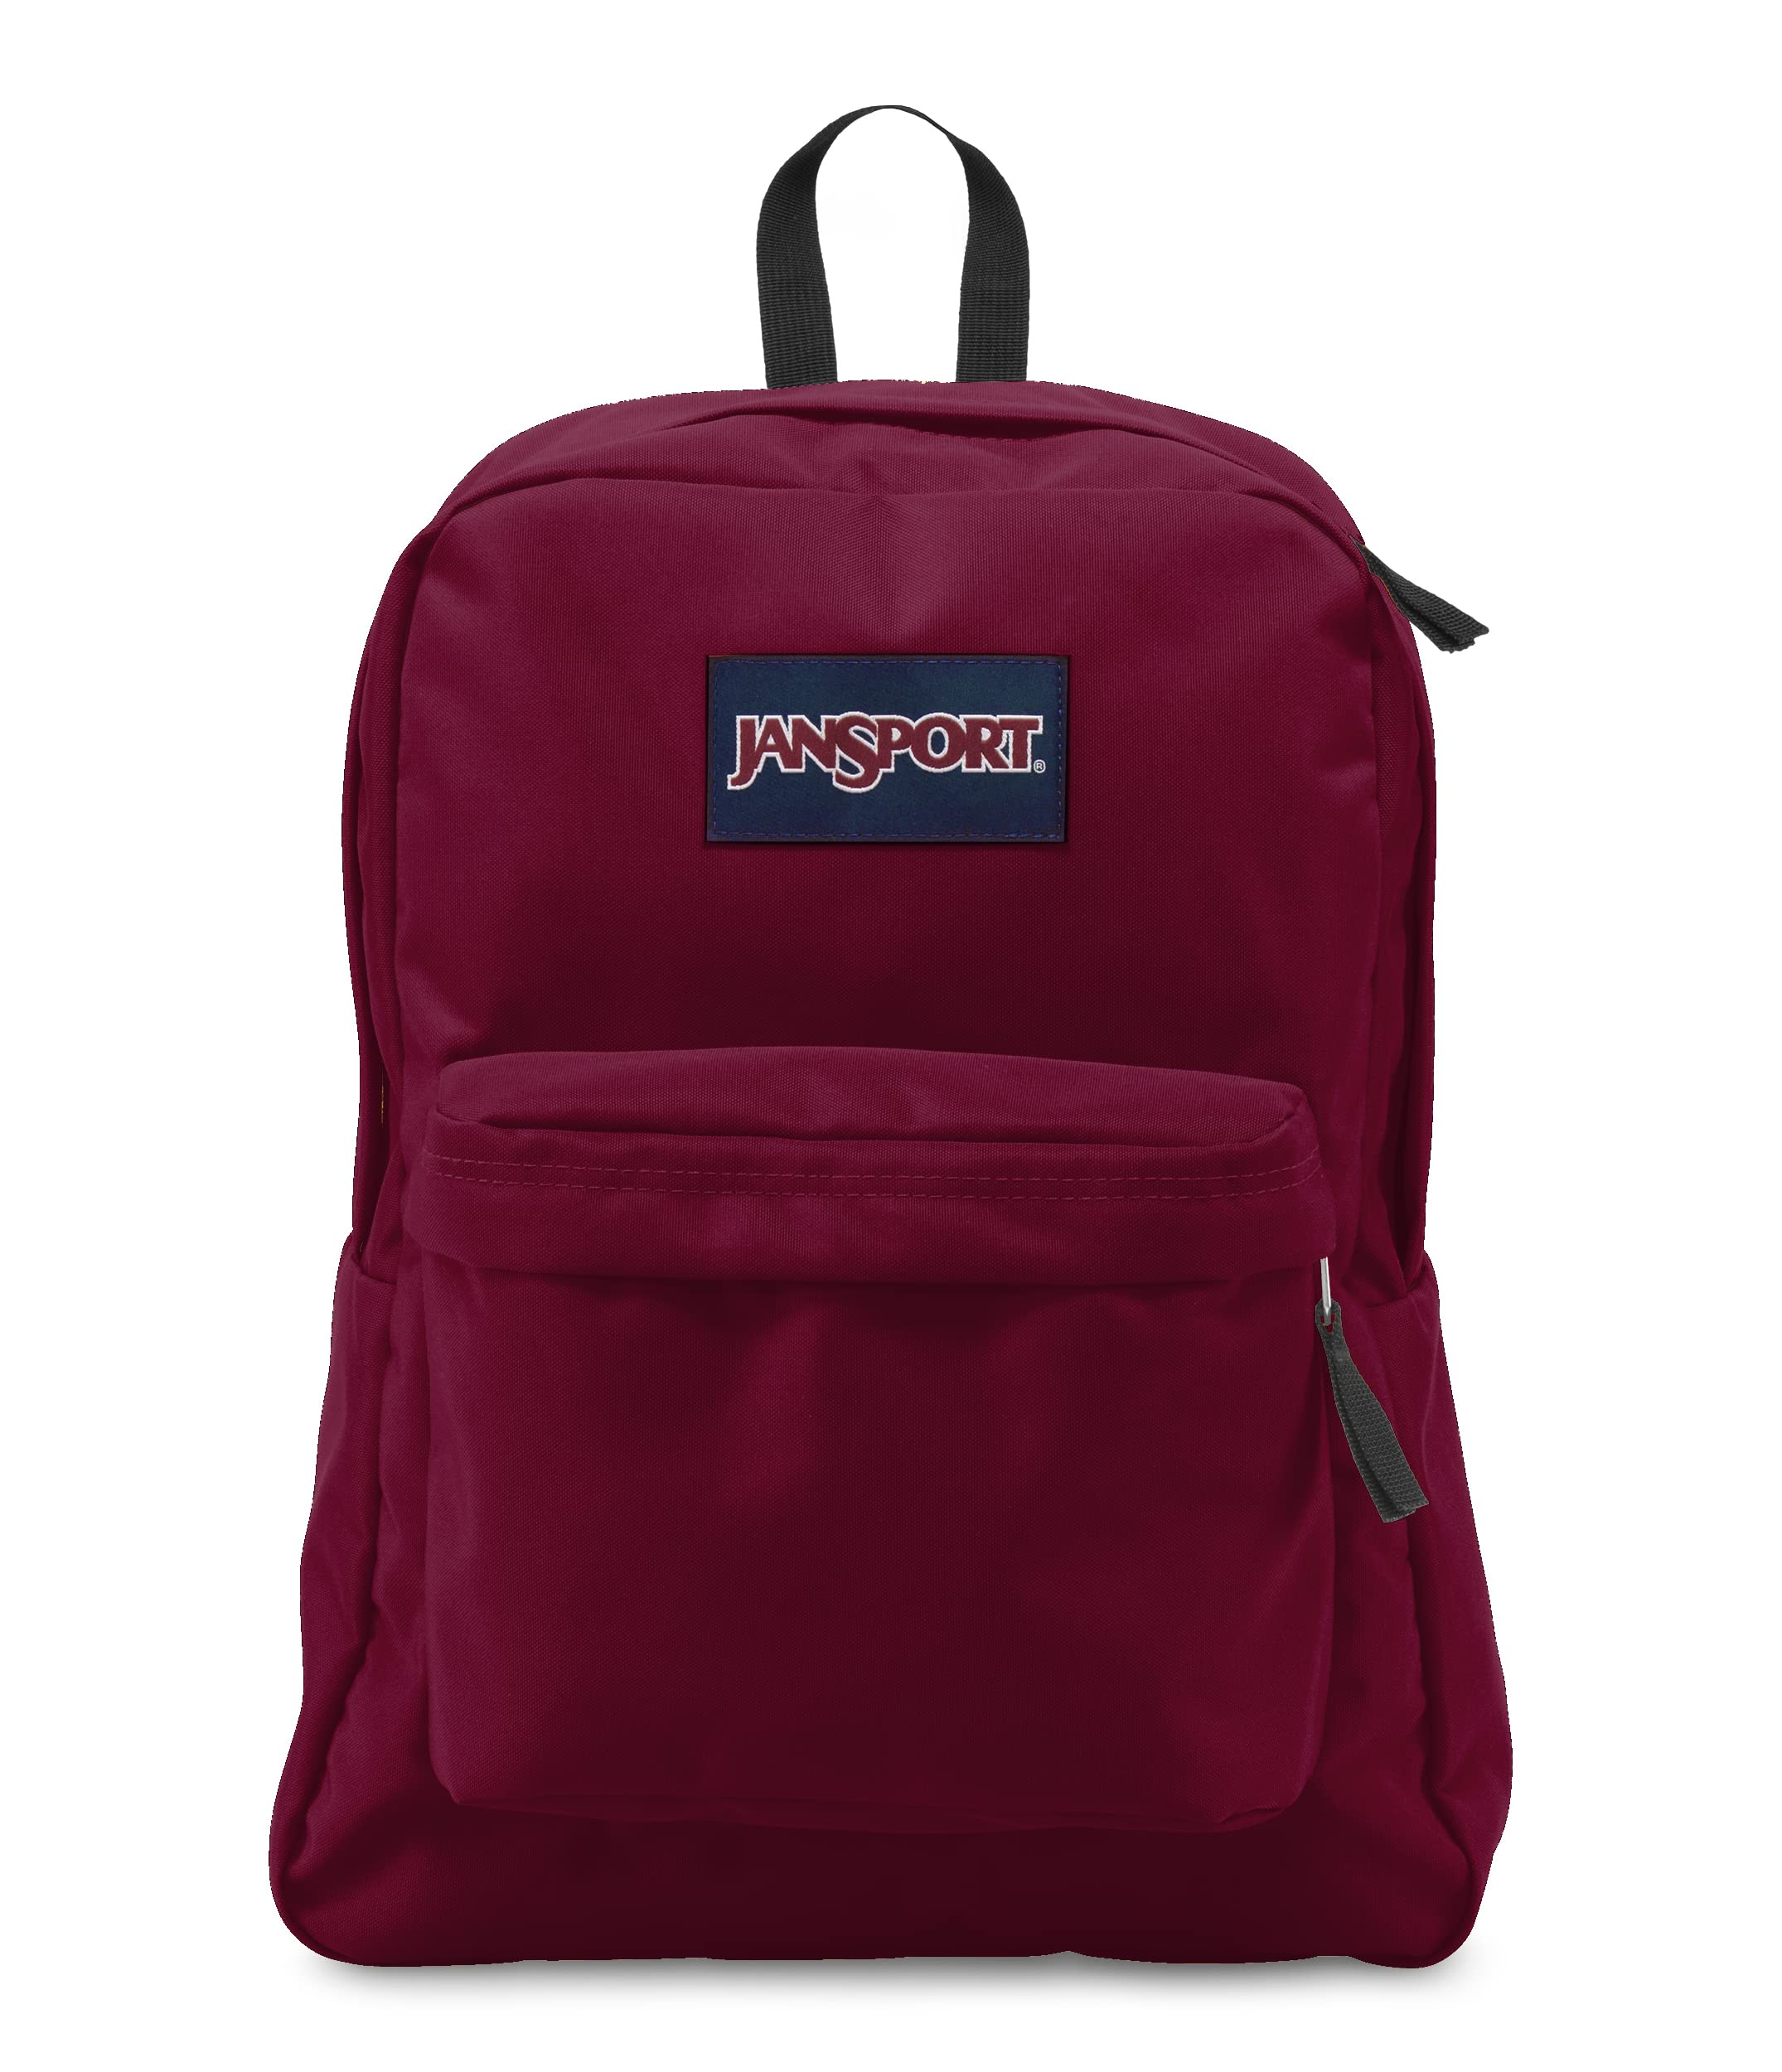 JanSport SuperBreak One Backpacks - Durable, Lightweight Bookbag with 1 Main Compartment, Front Utility Pocket with Built-in Organizer - Premium Backpack, Russet Red